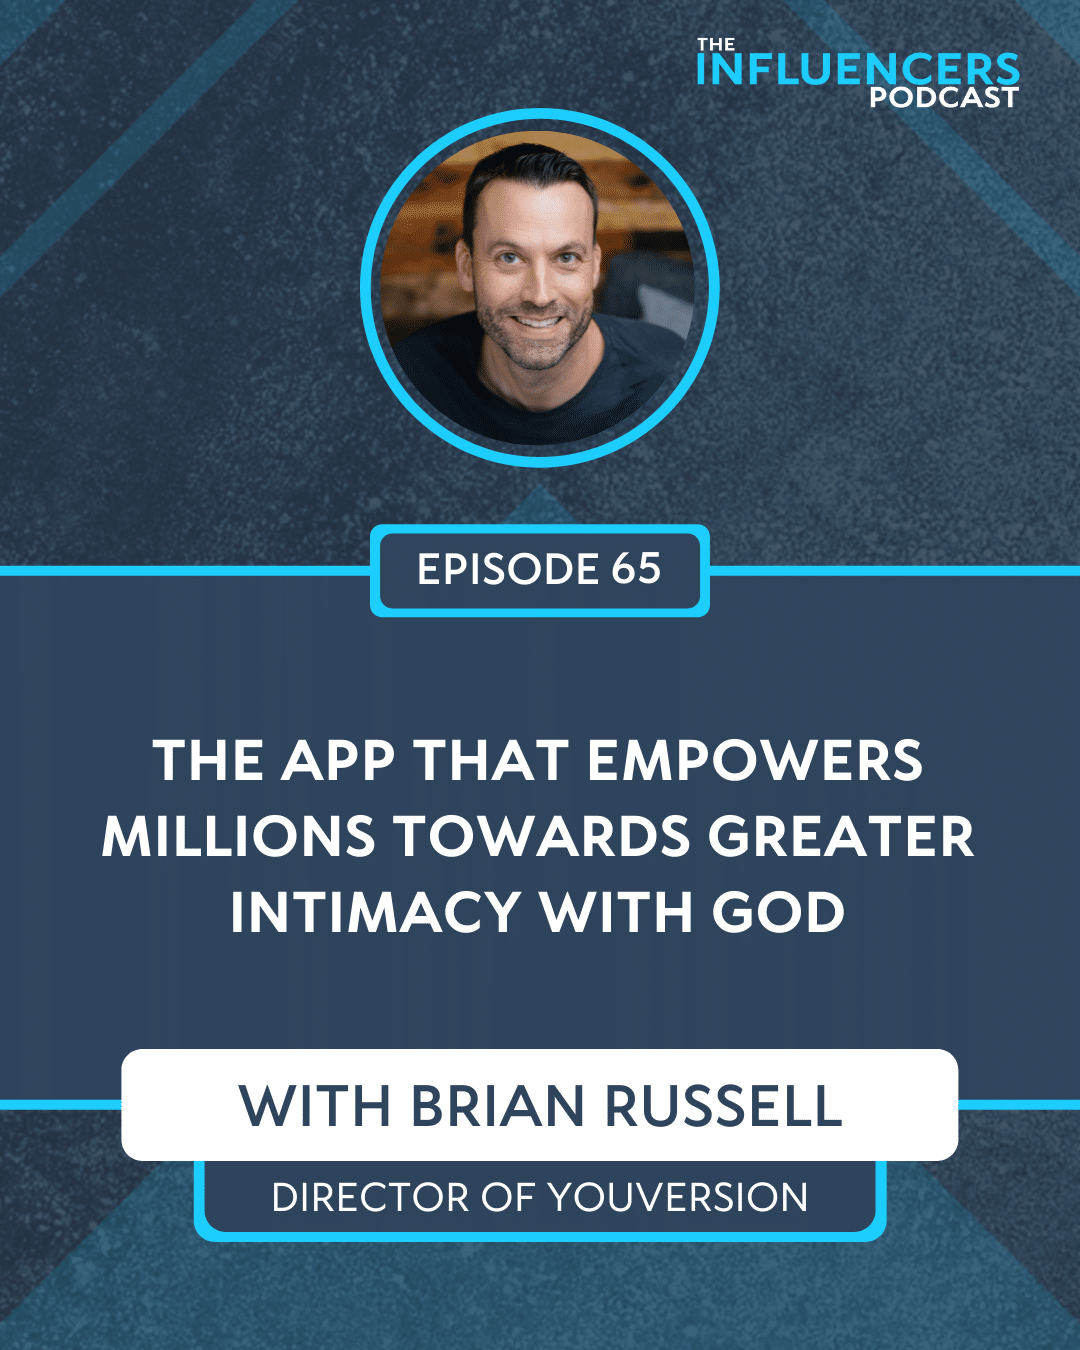 Episode 65 with Brian Russell.